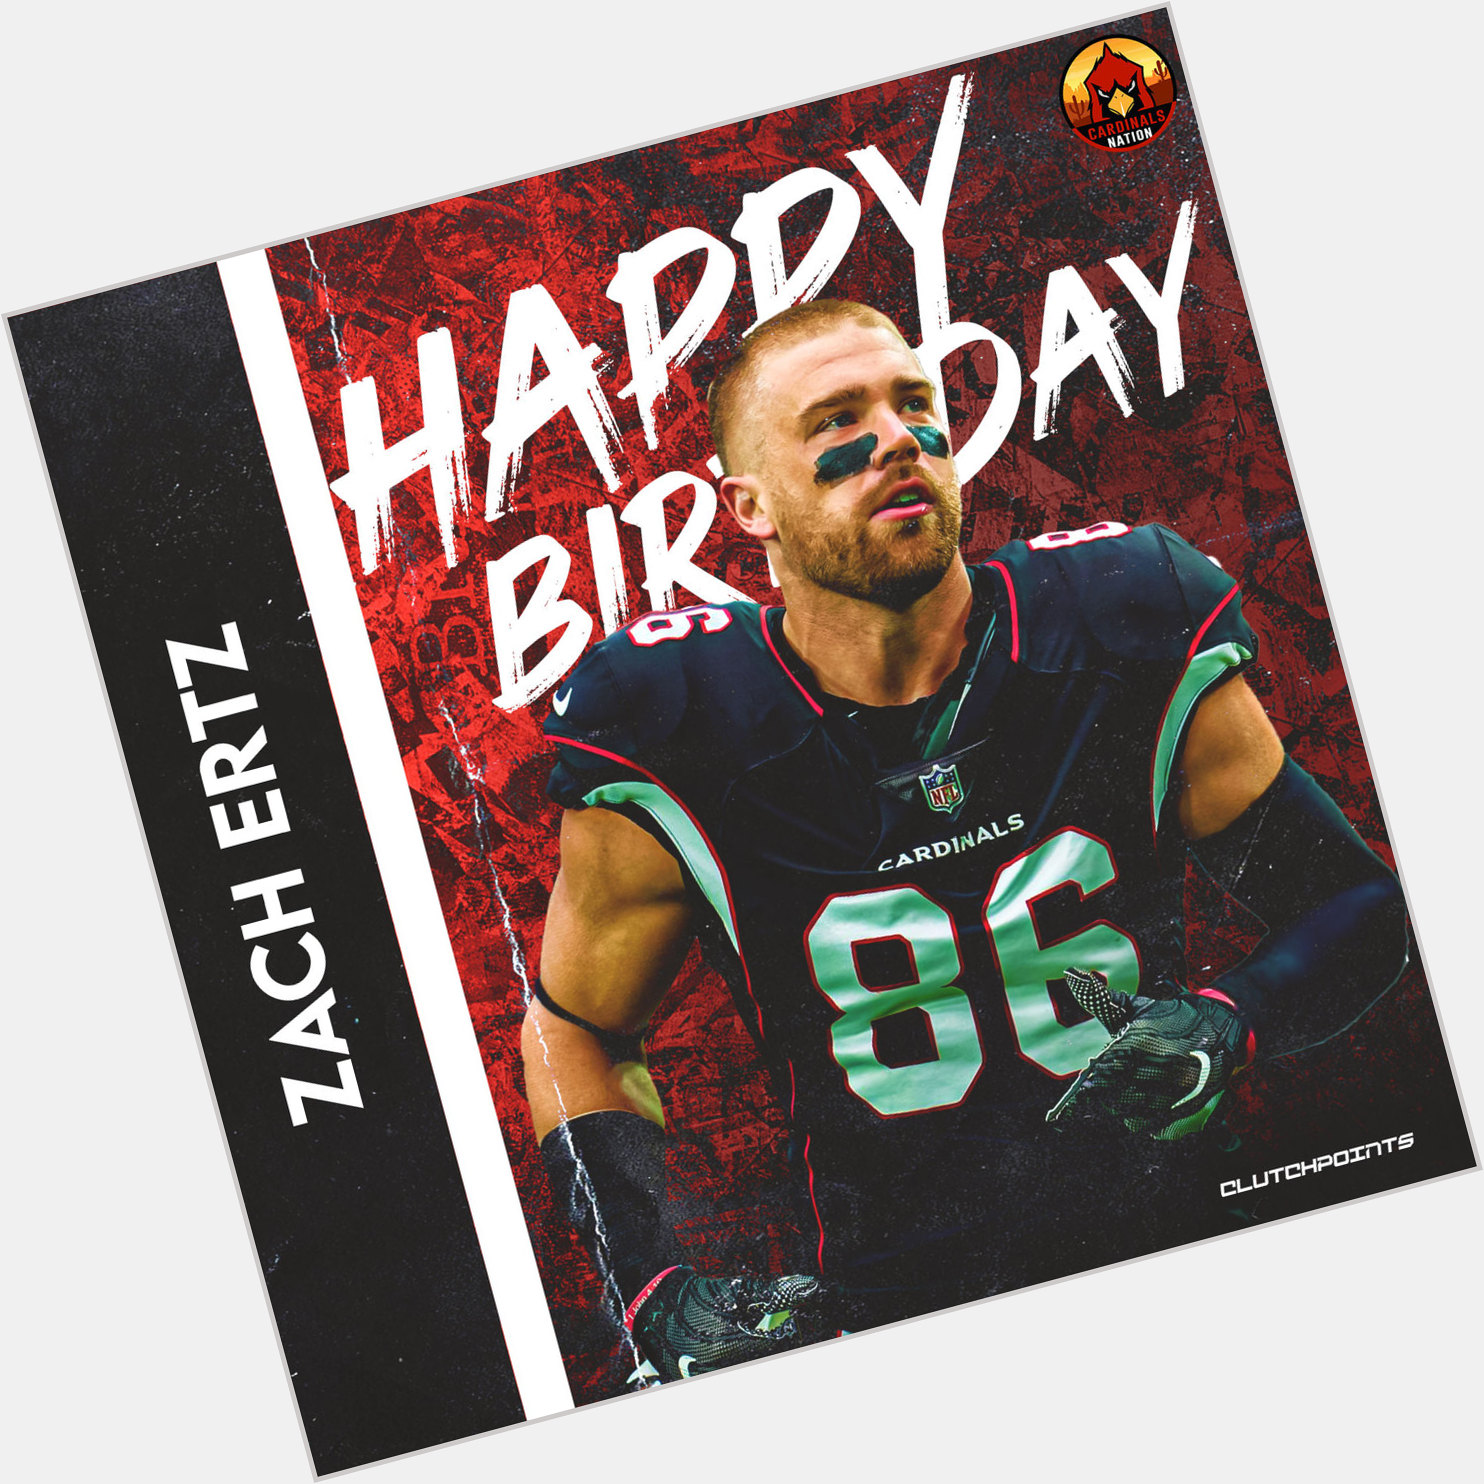 Cardinals Nation, join us in wishing Zach Ertz a happy 32nd birthday 